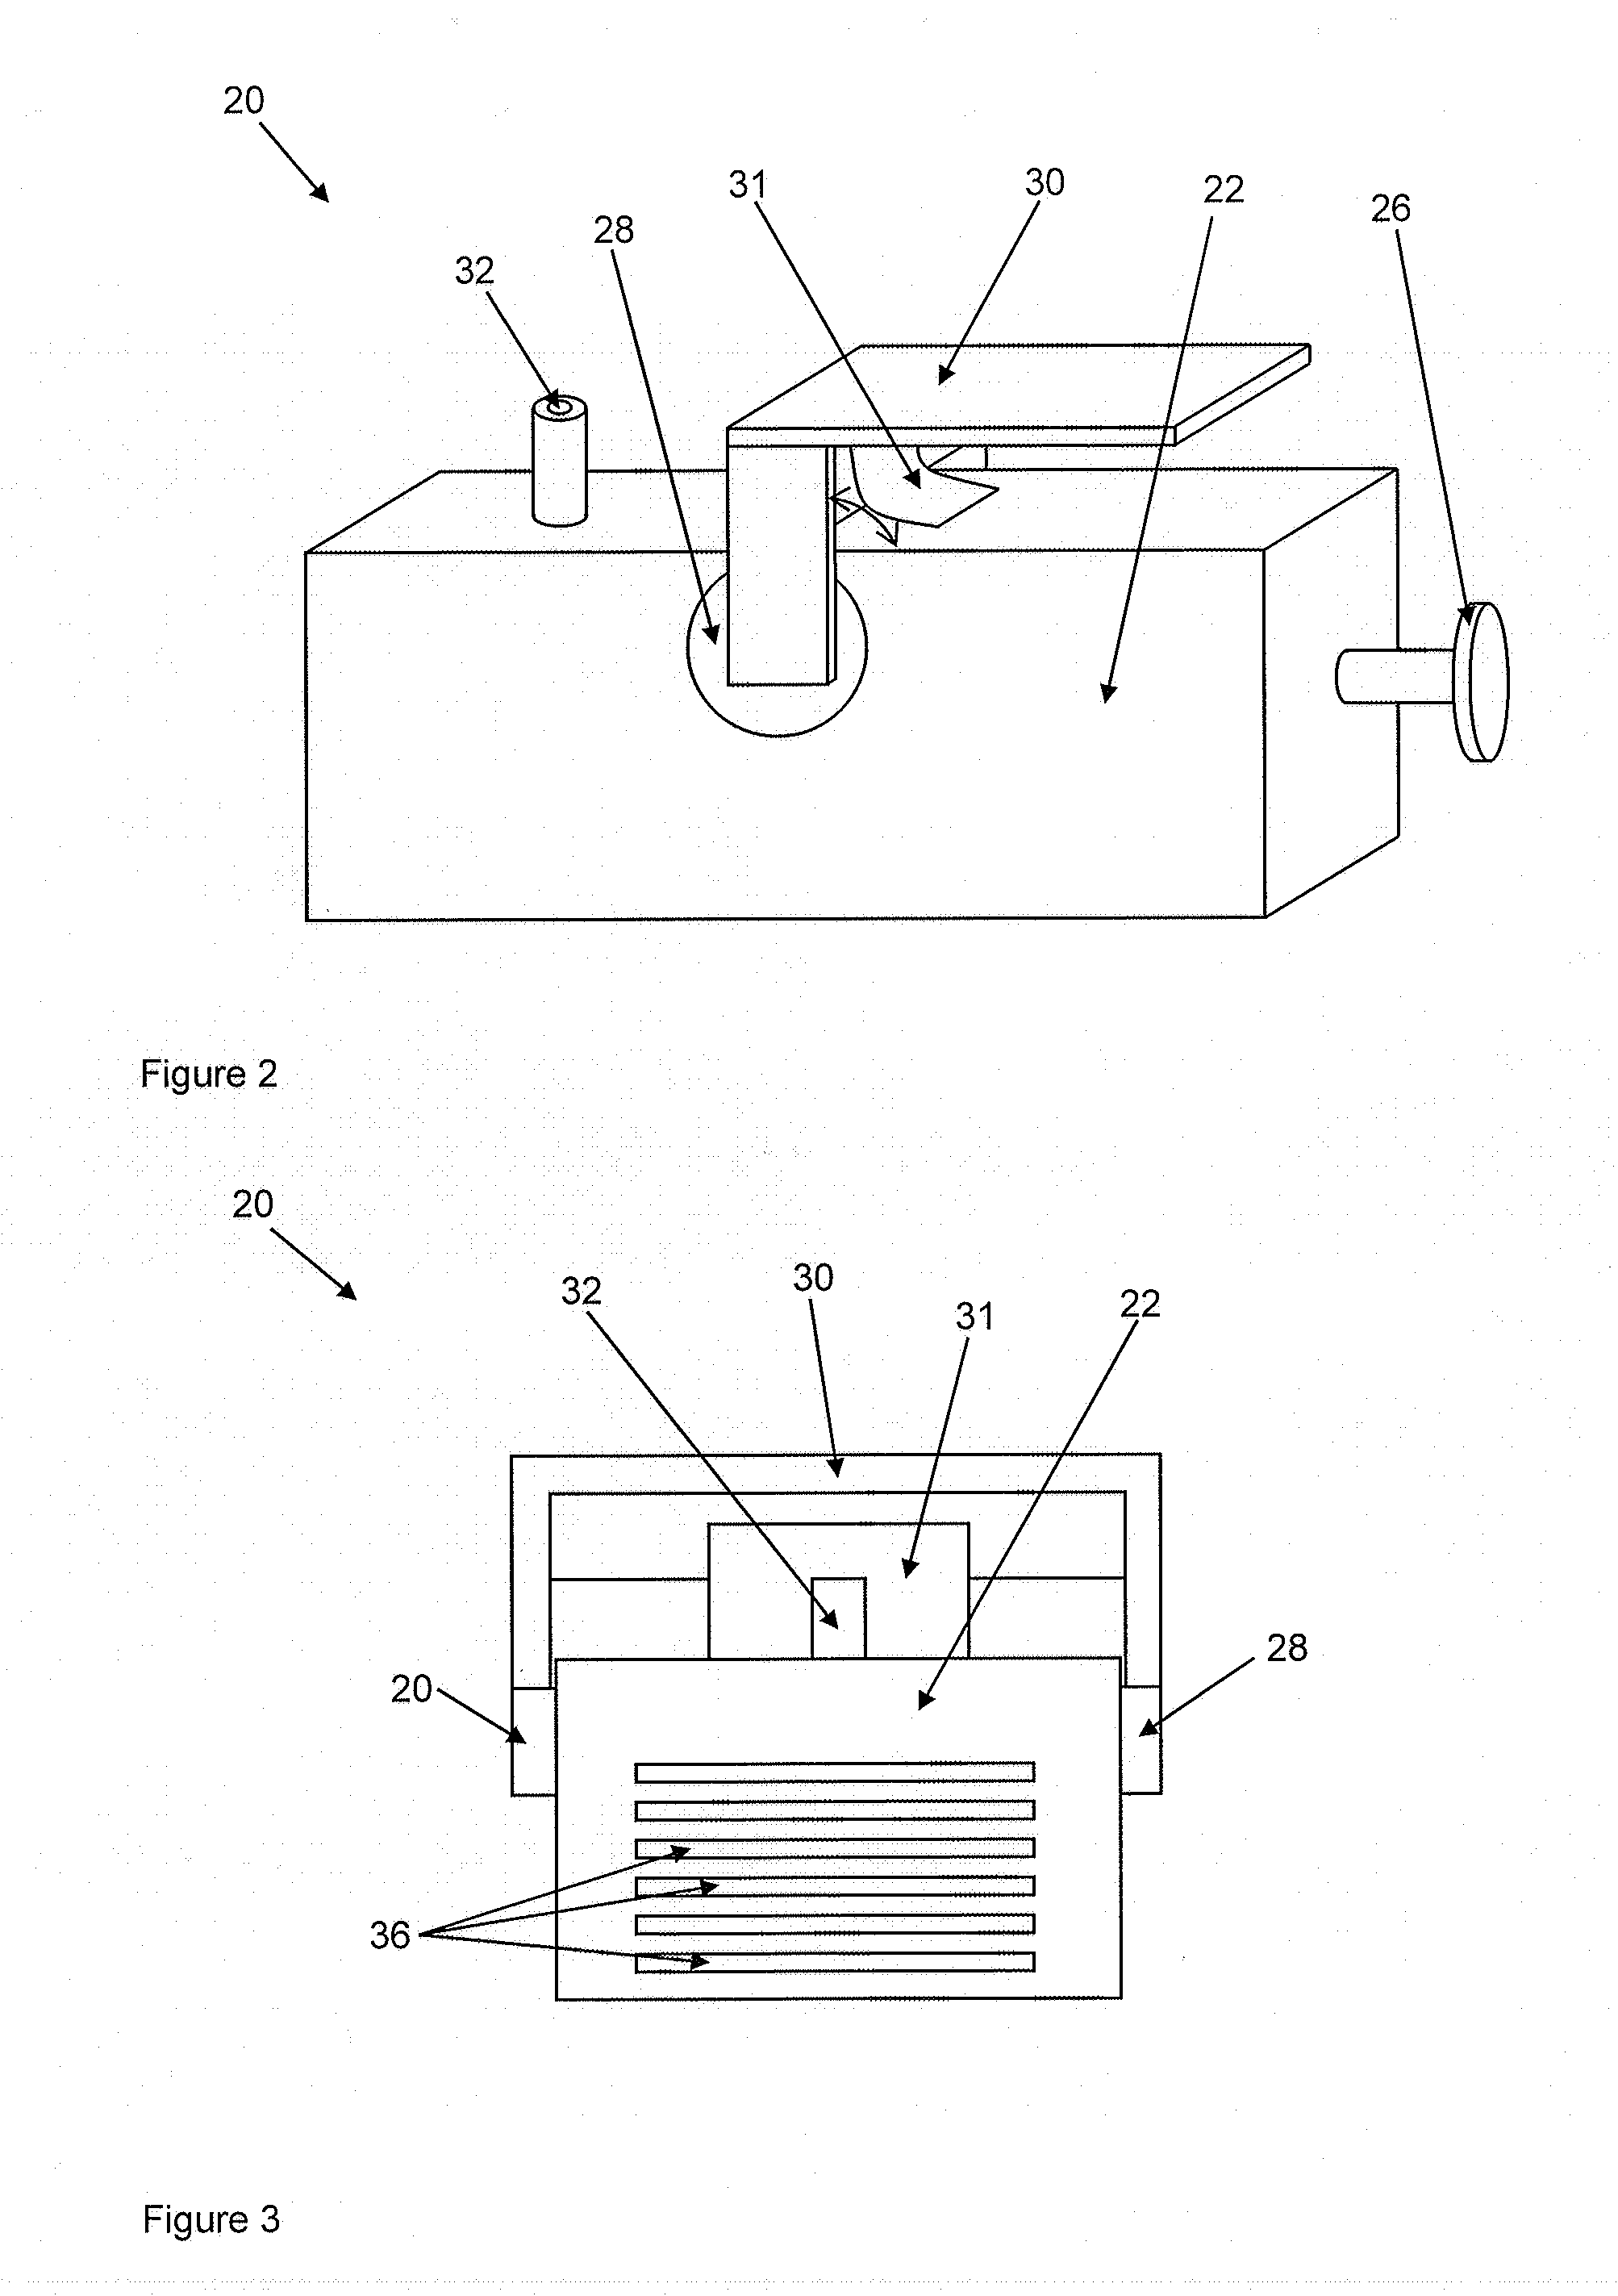 Device and Method for Generating Vacuum for Vacuum Cementing Systems